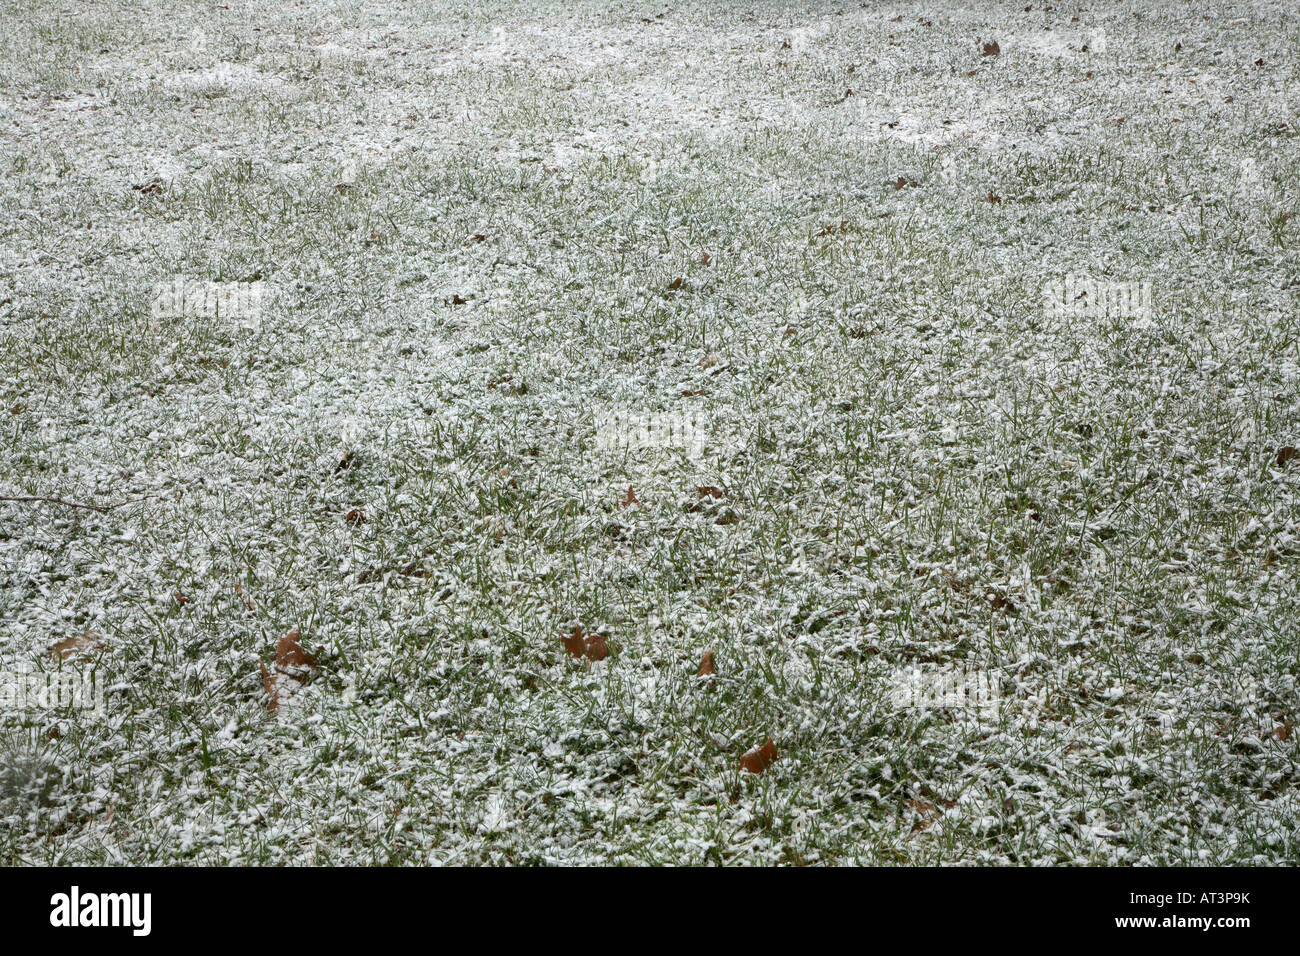 Grass lawn with few maple leaves and light covering of large snowflakes Stock Photo